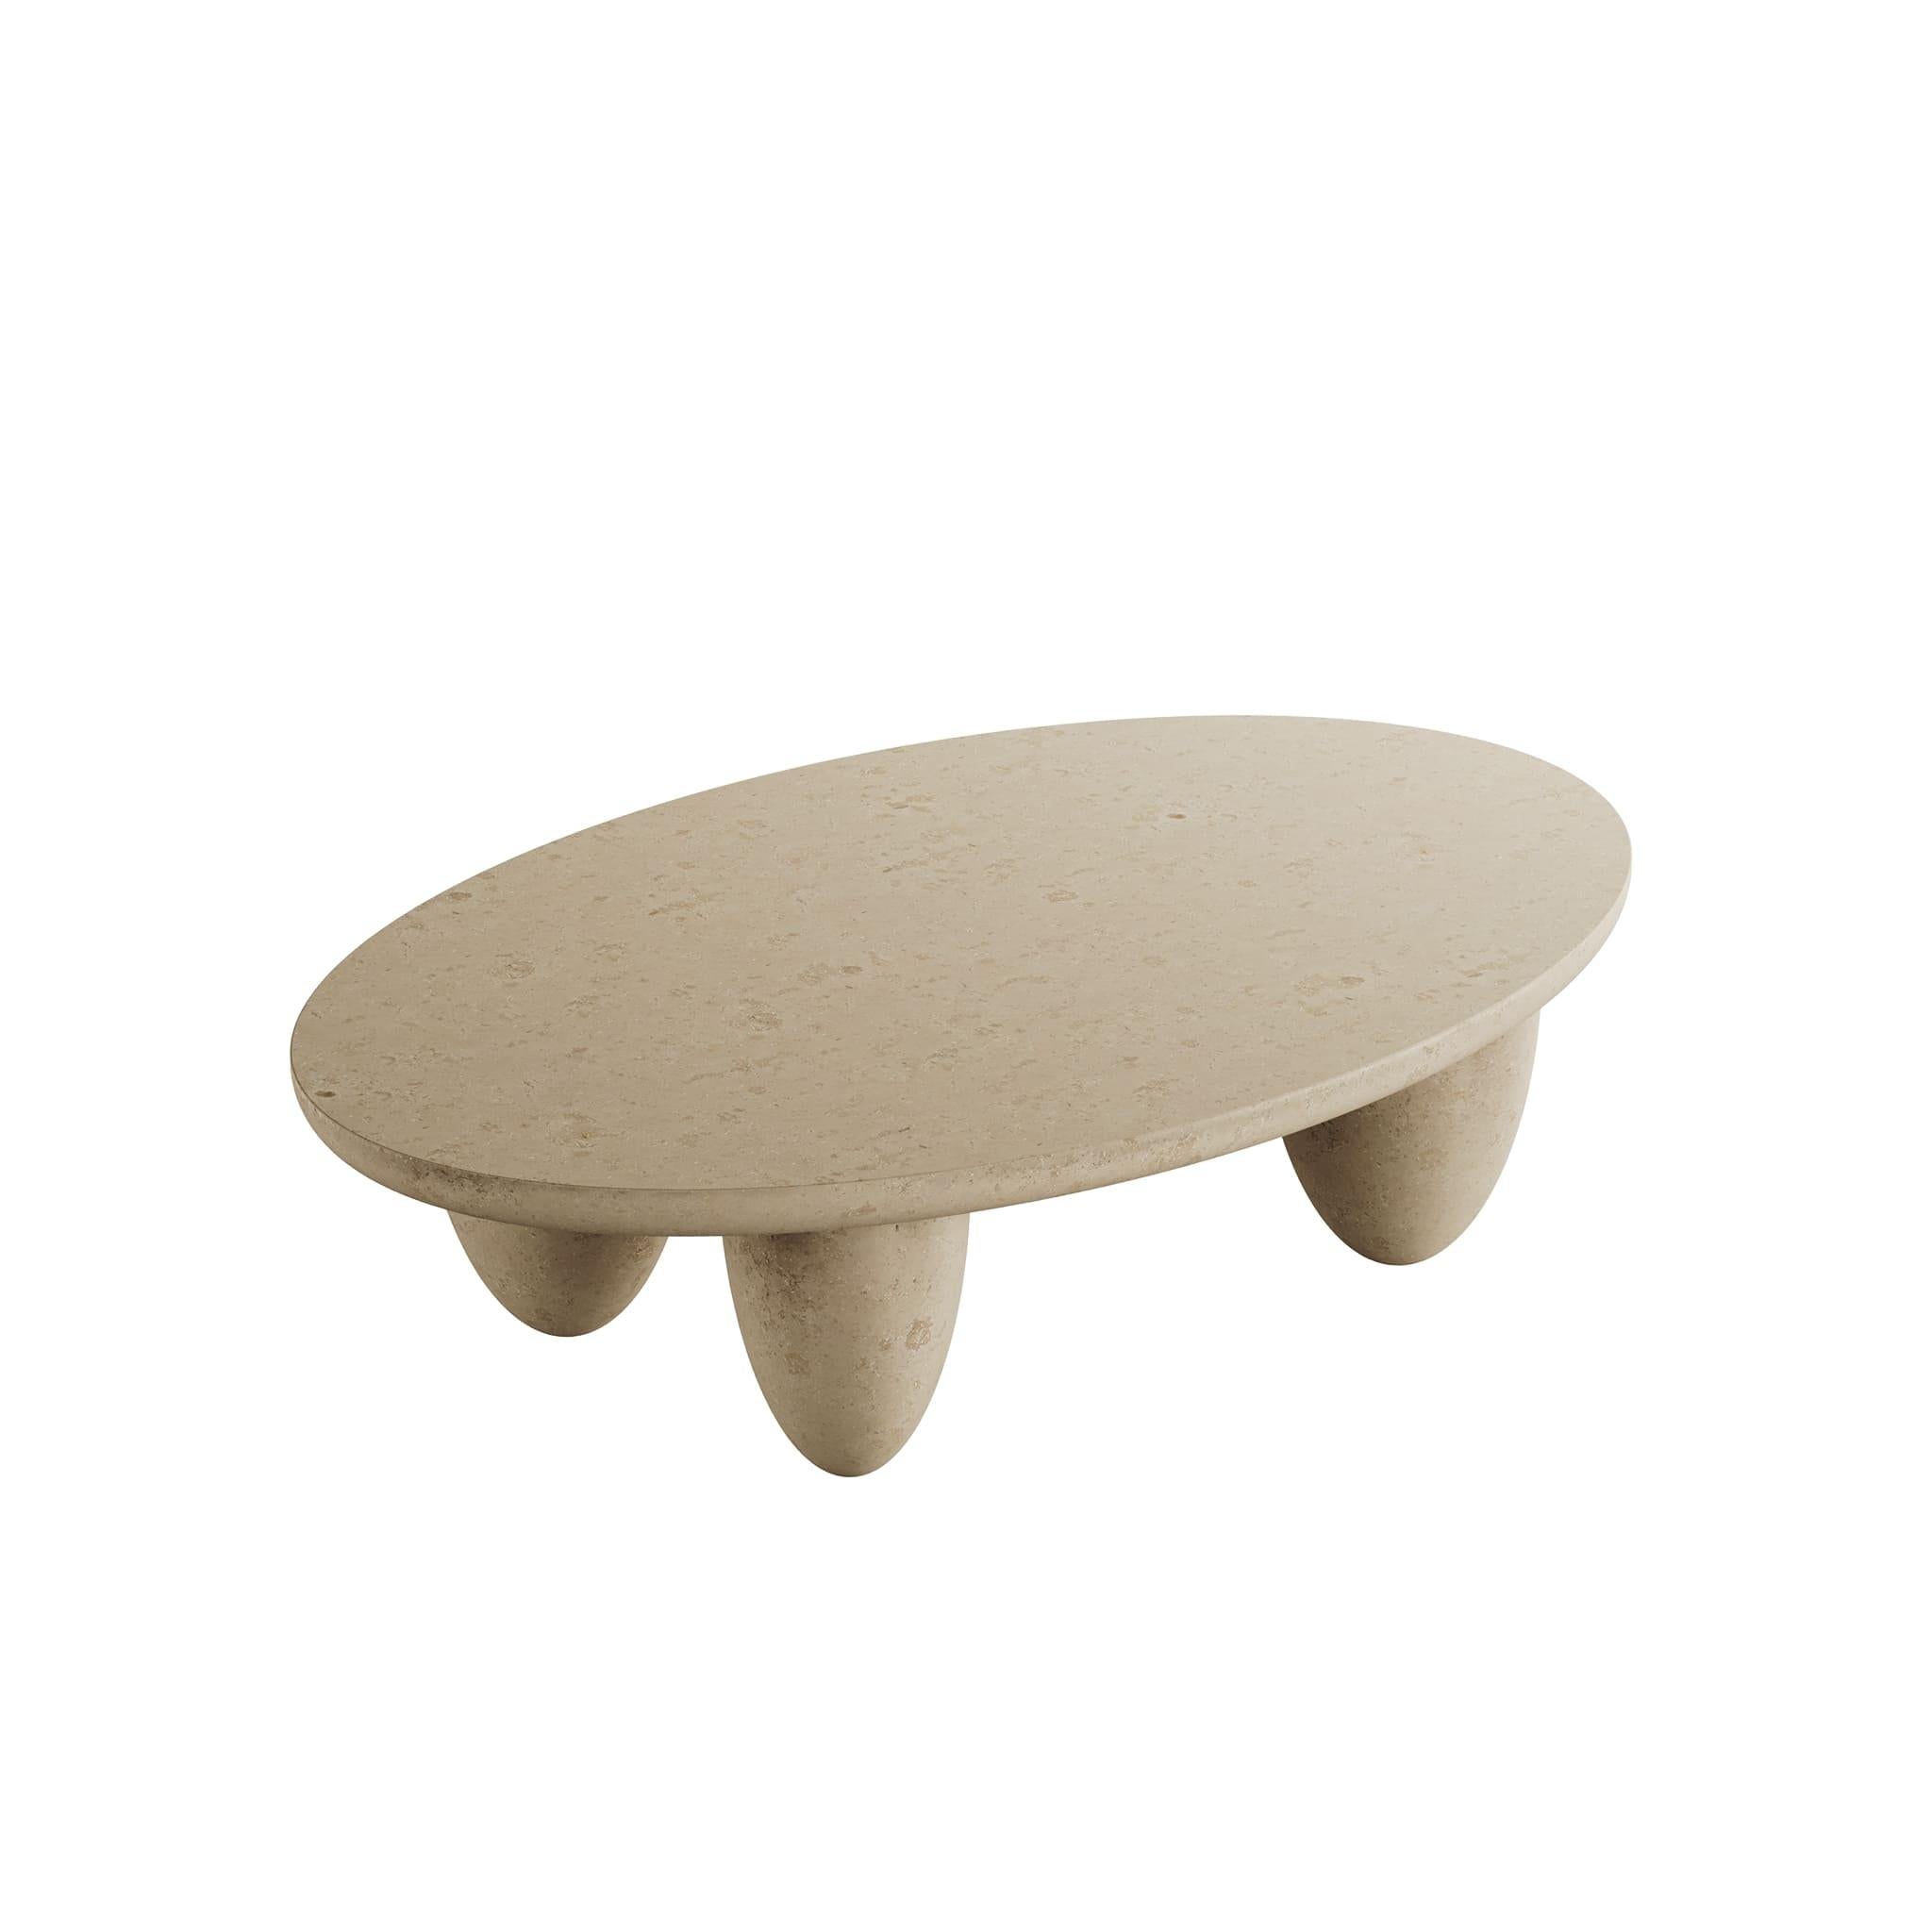 Lunarys Center Table Natural is an outstanding modern design piece. The outdoor center table’s voluptuous anatomy and soft texture are perfect for indoor or outdoor projects. Lunarys Center Table Natural, defined by clean lines for a timeless